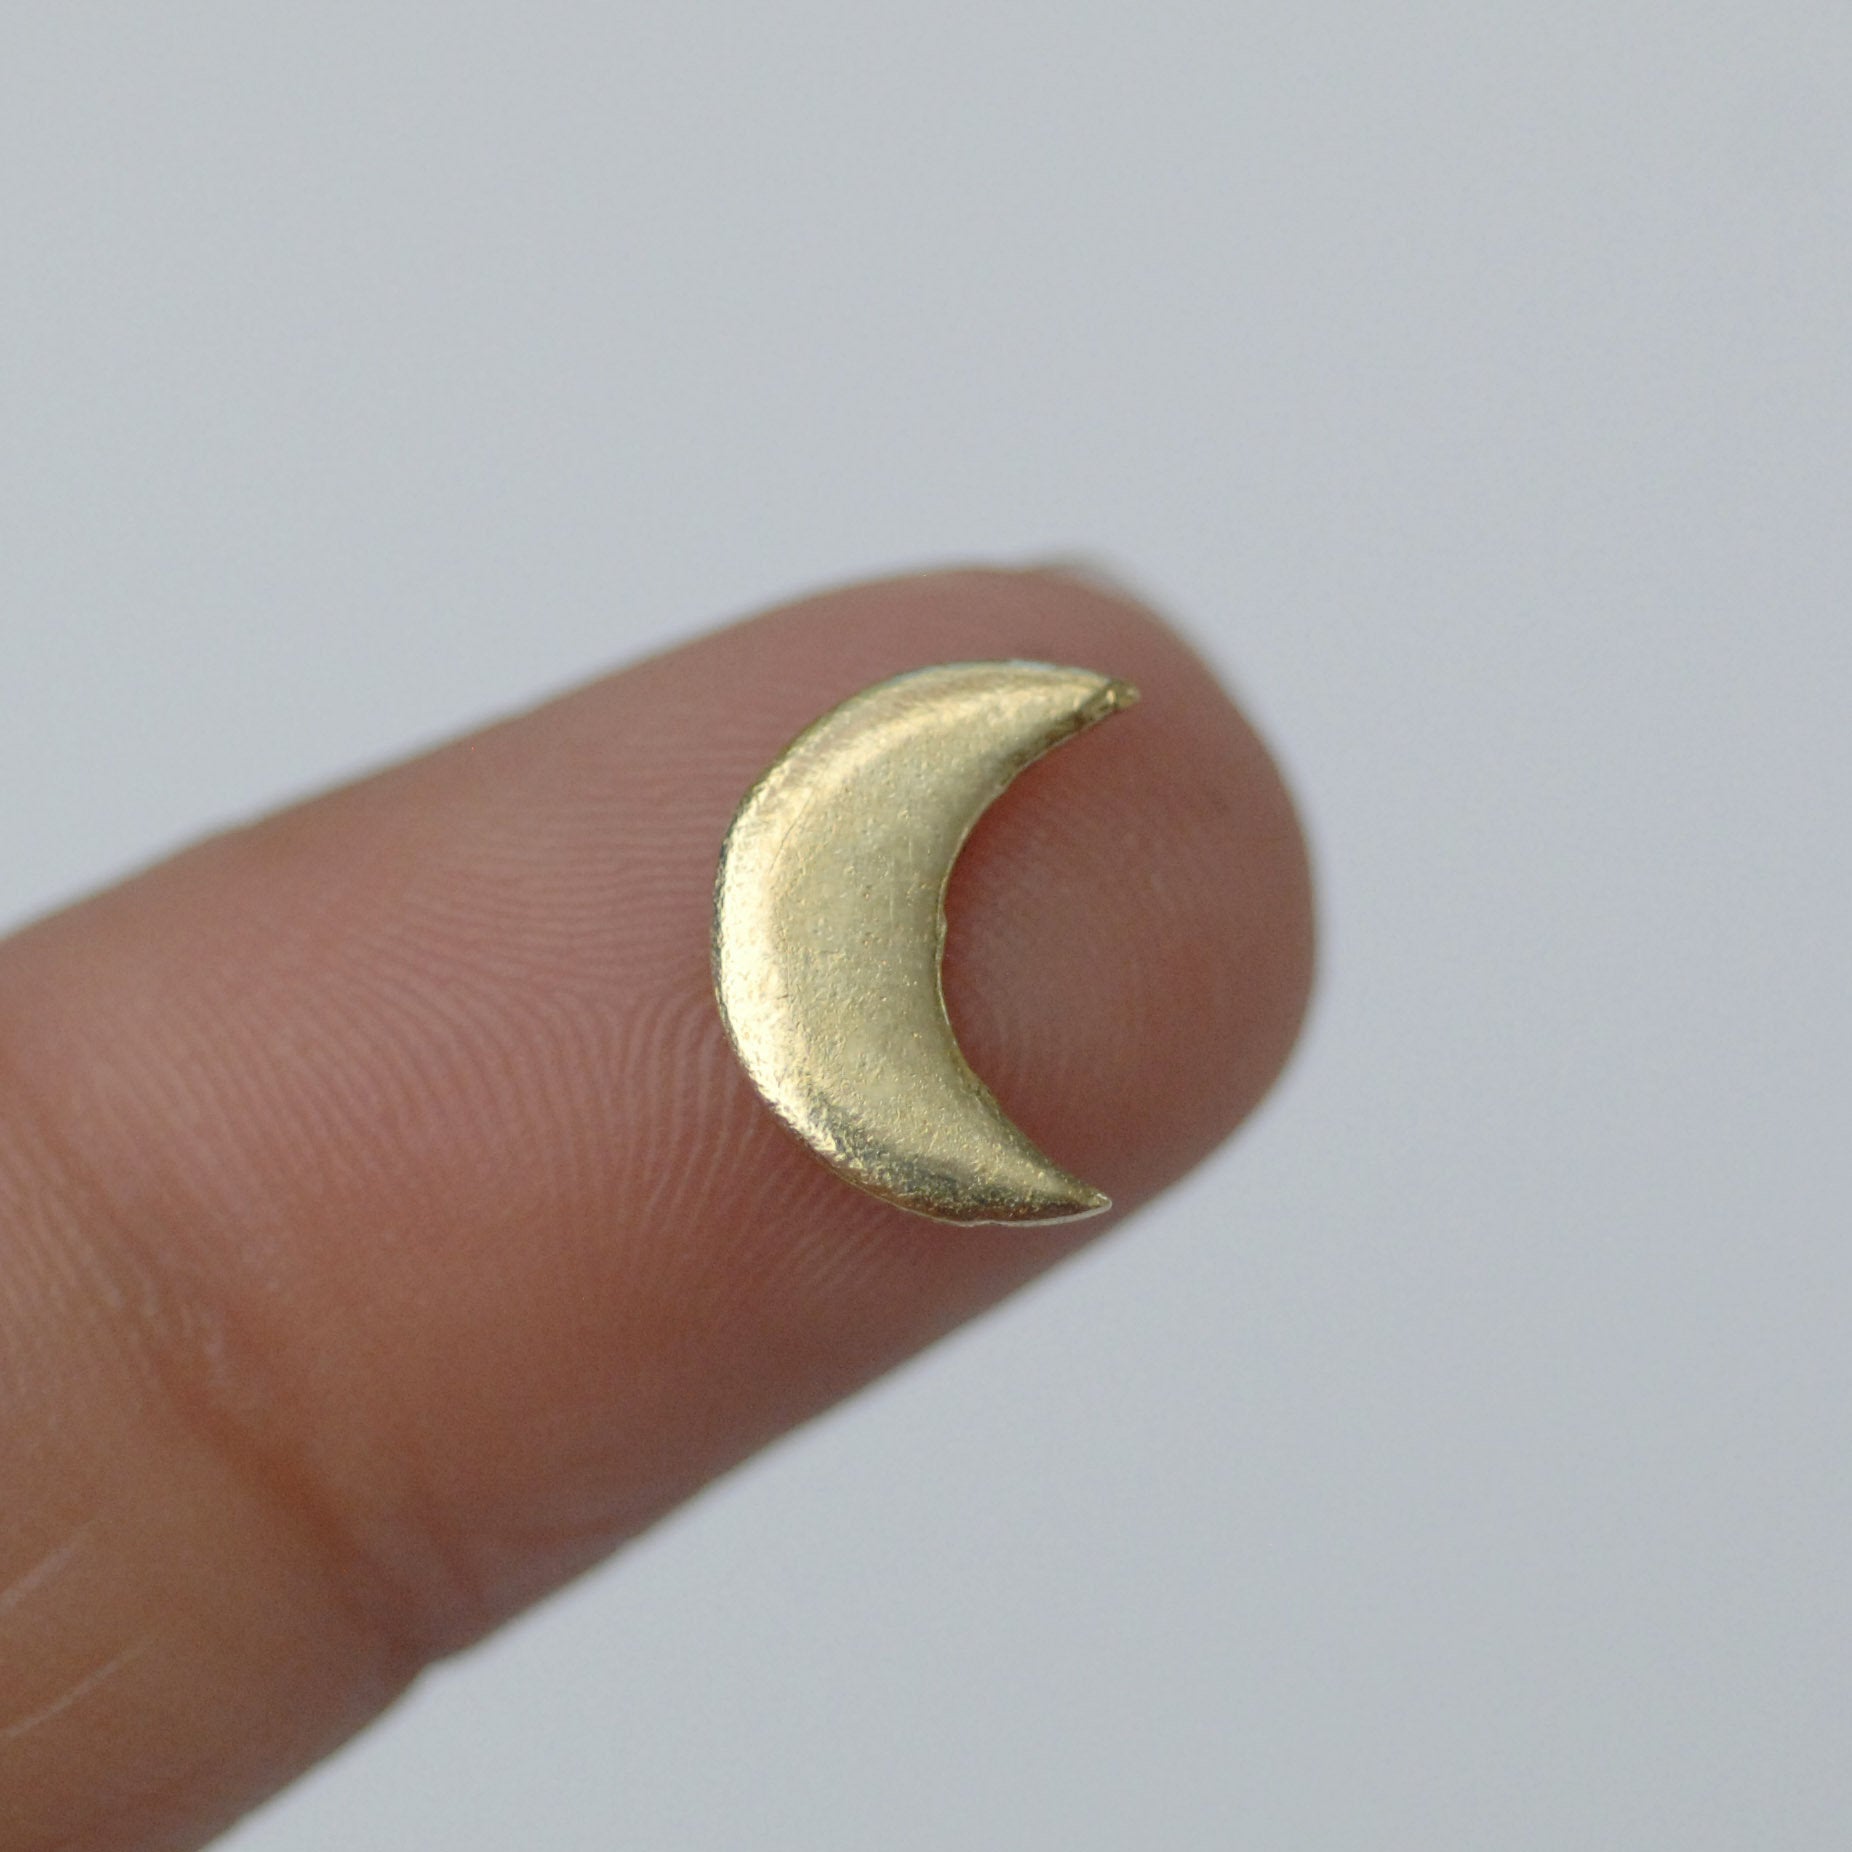 Blank Tiny Shape Crecent Moon 10mm x 8mm 22g or Enameling Tiny Blanks for Jewelry Making Soldering Blanks - 8 pieces Mini shape